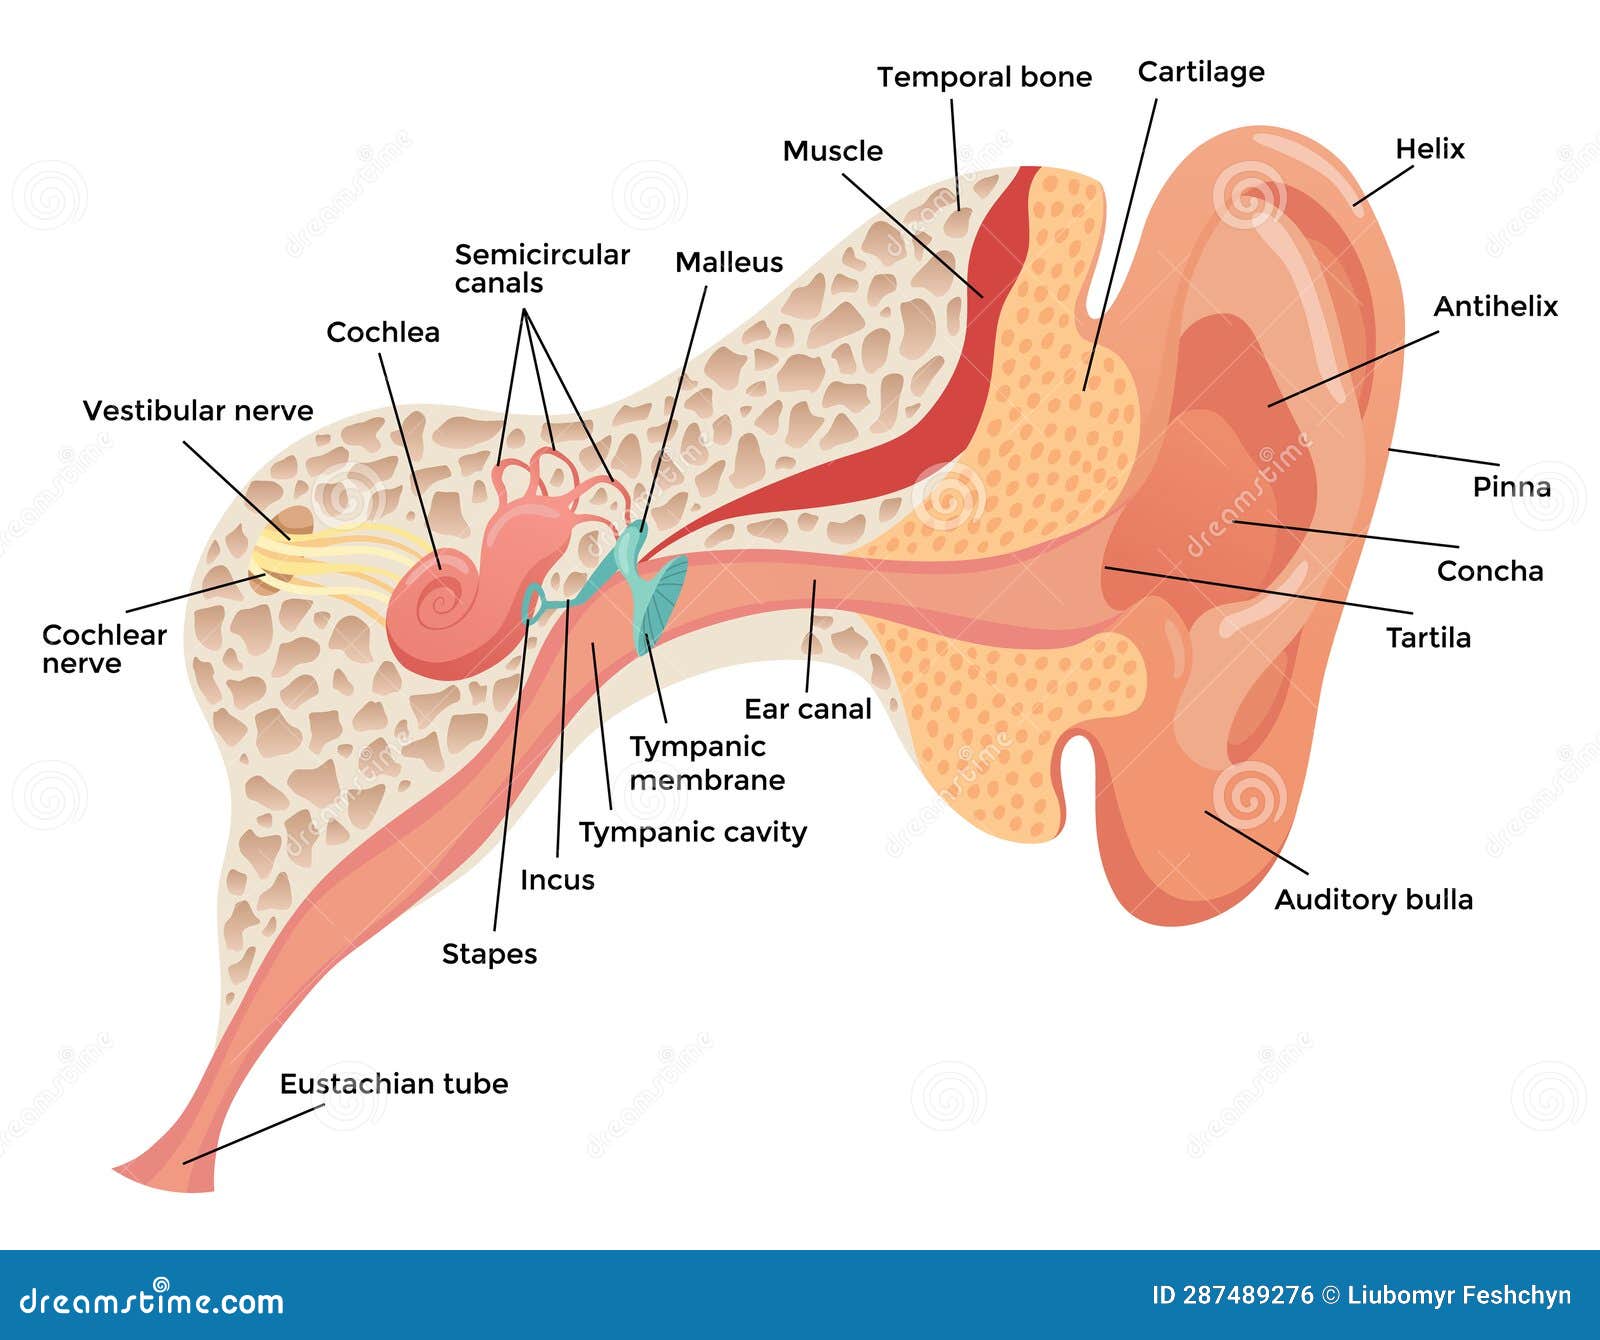 human ear anatomy, structure anatomical diagram. outer, middle and inner ear section concept. eardrum, cochlea